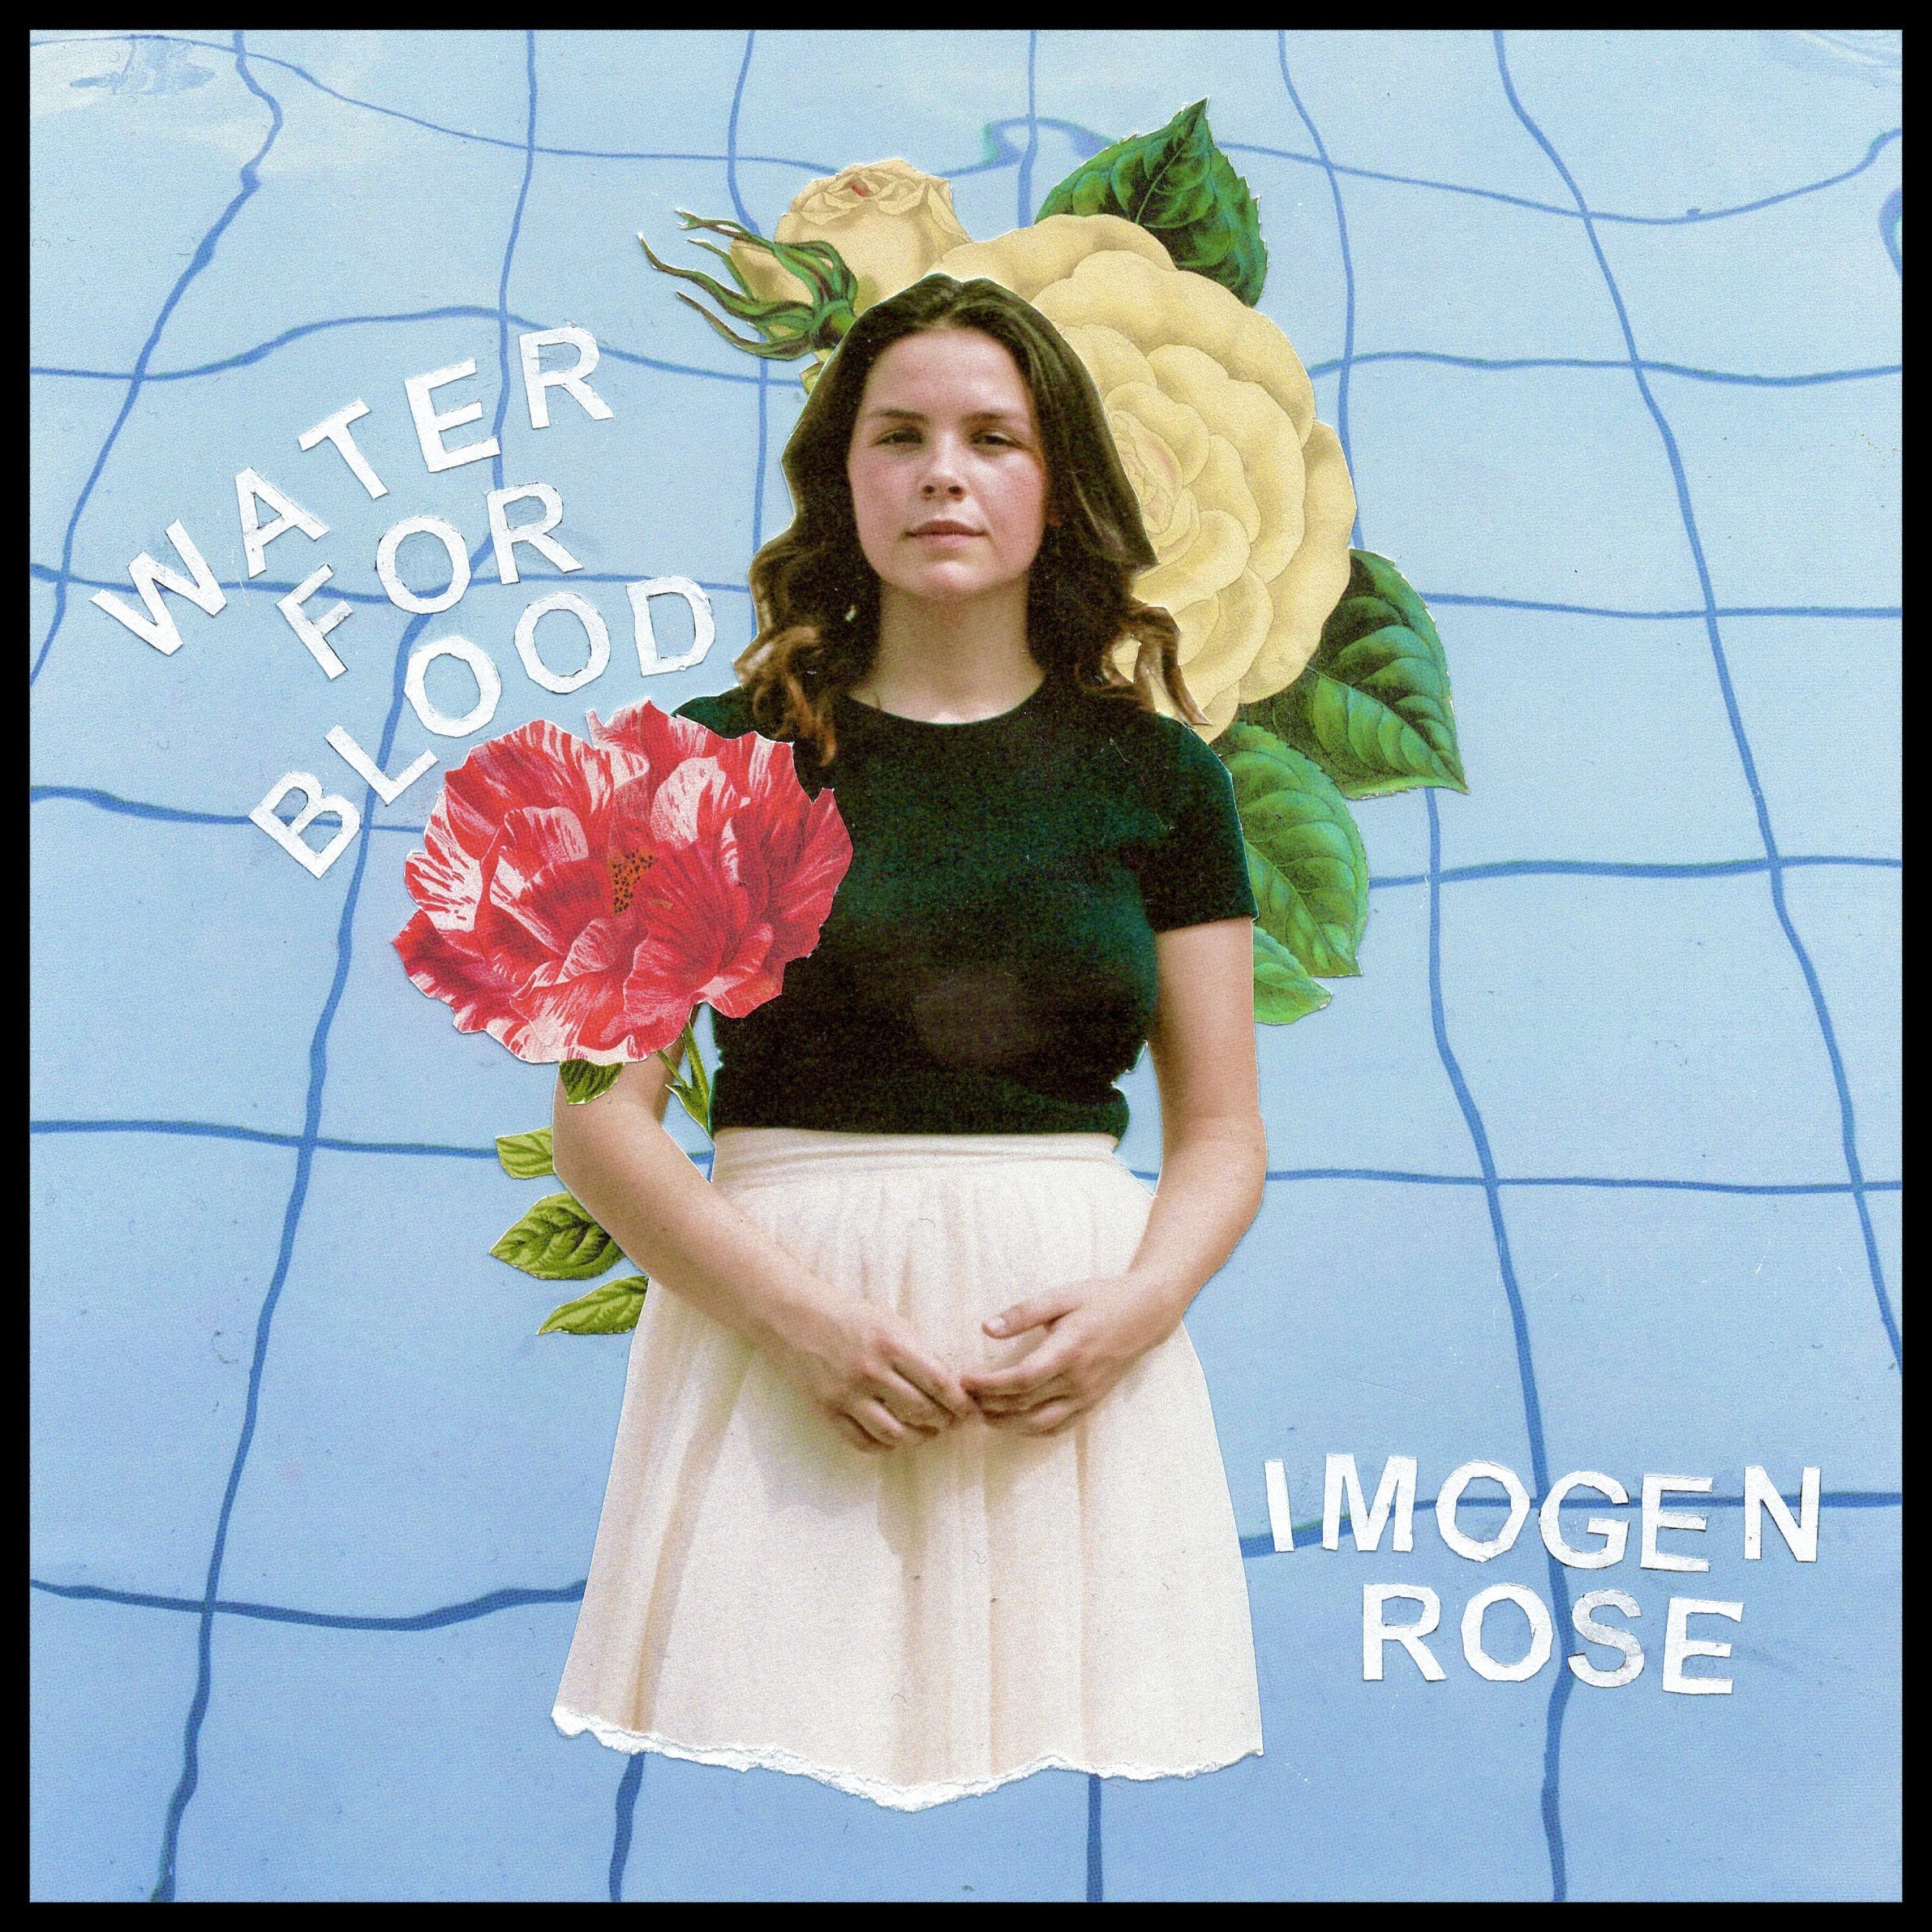 Imogen Rose - Water for Blood